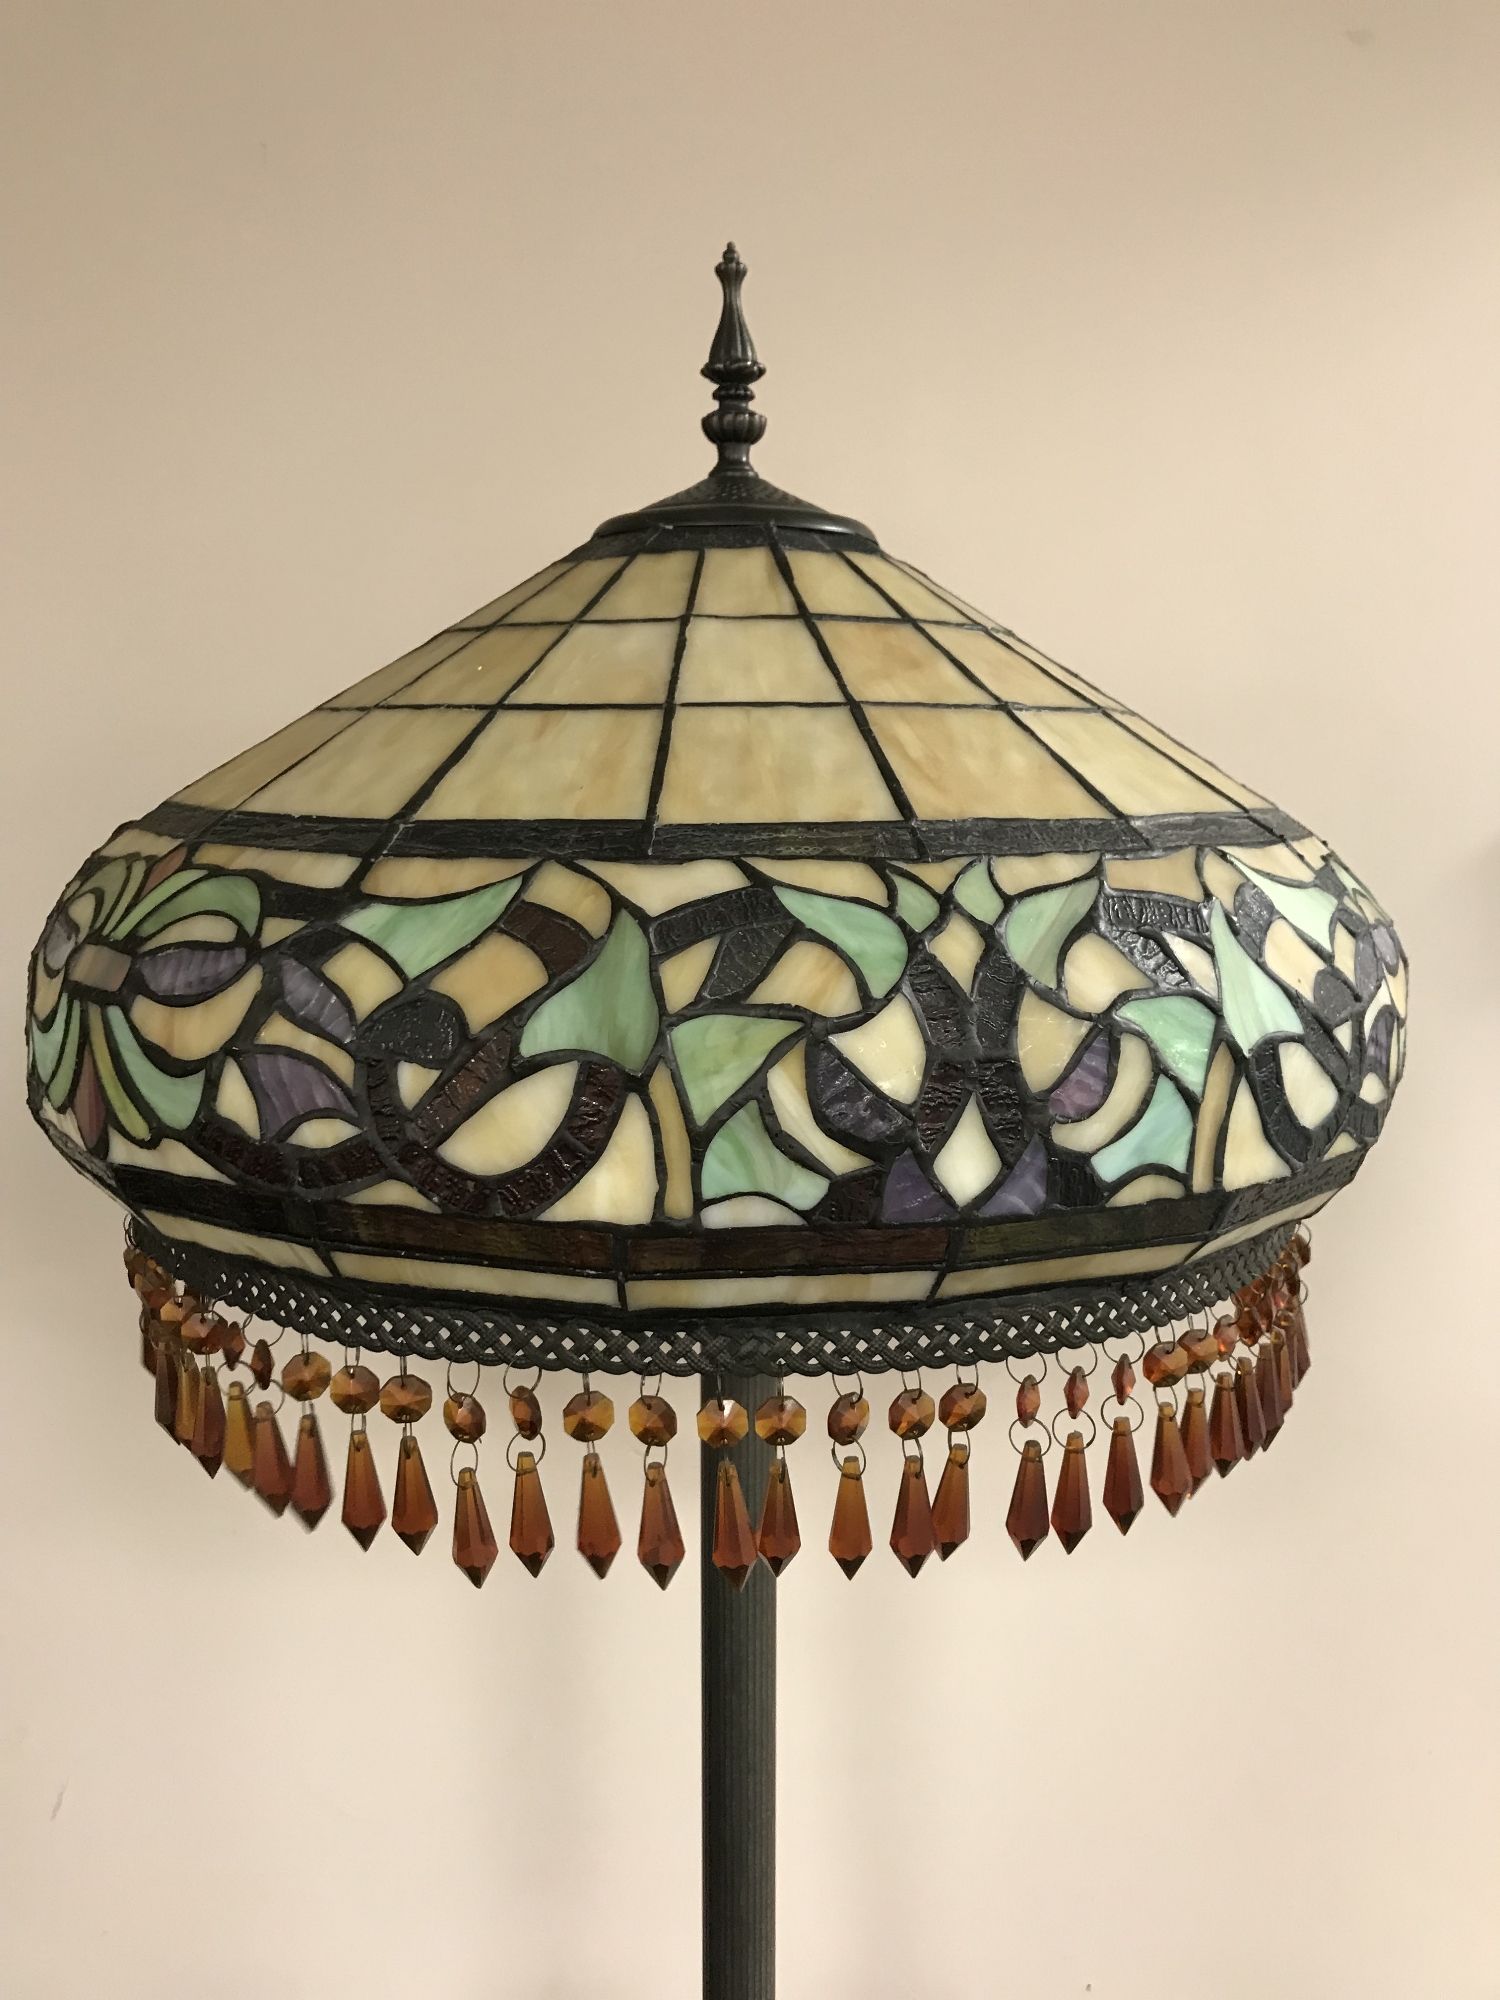 A Tiffany style floor lamp with shade - Image 2 of 2